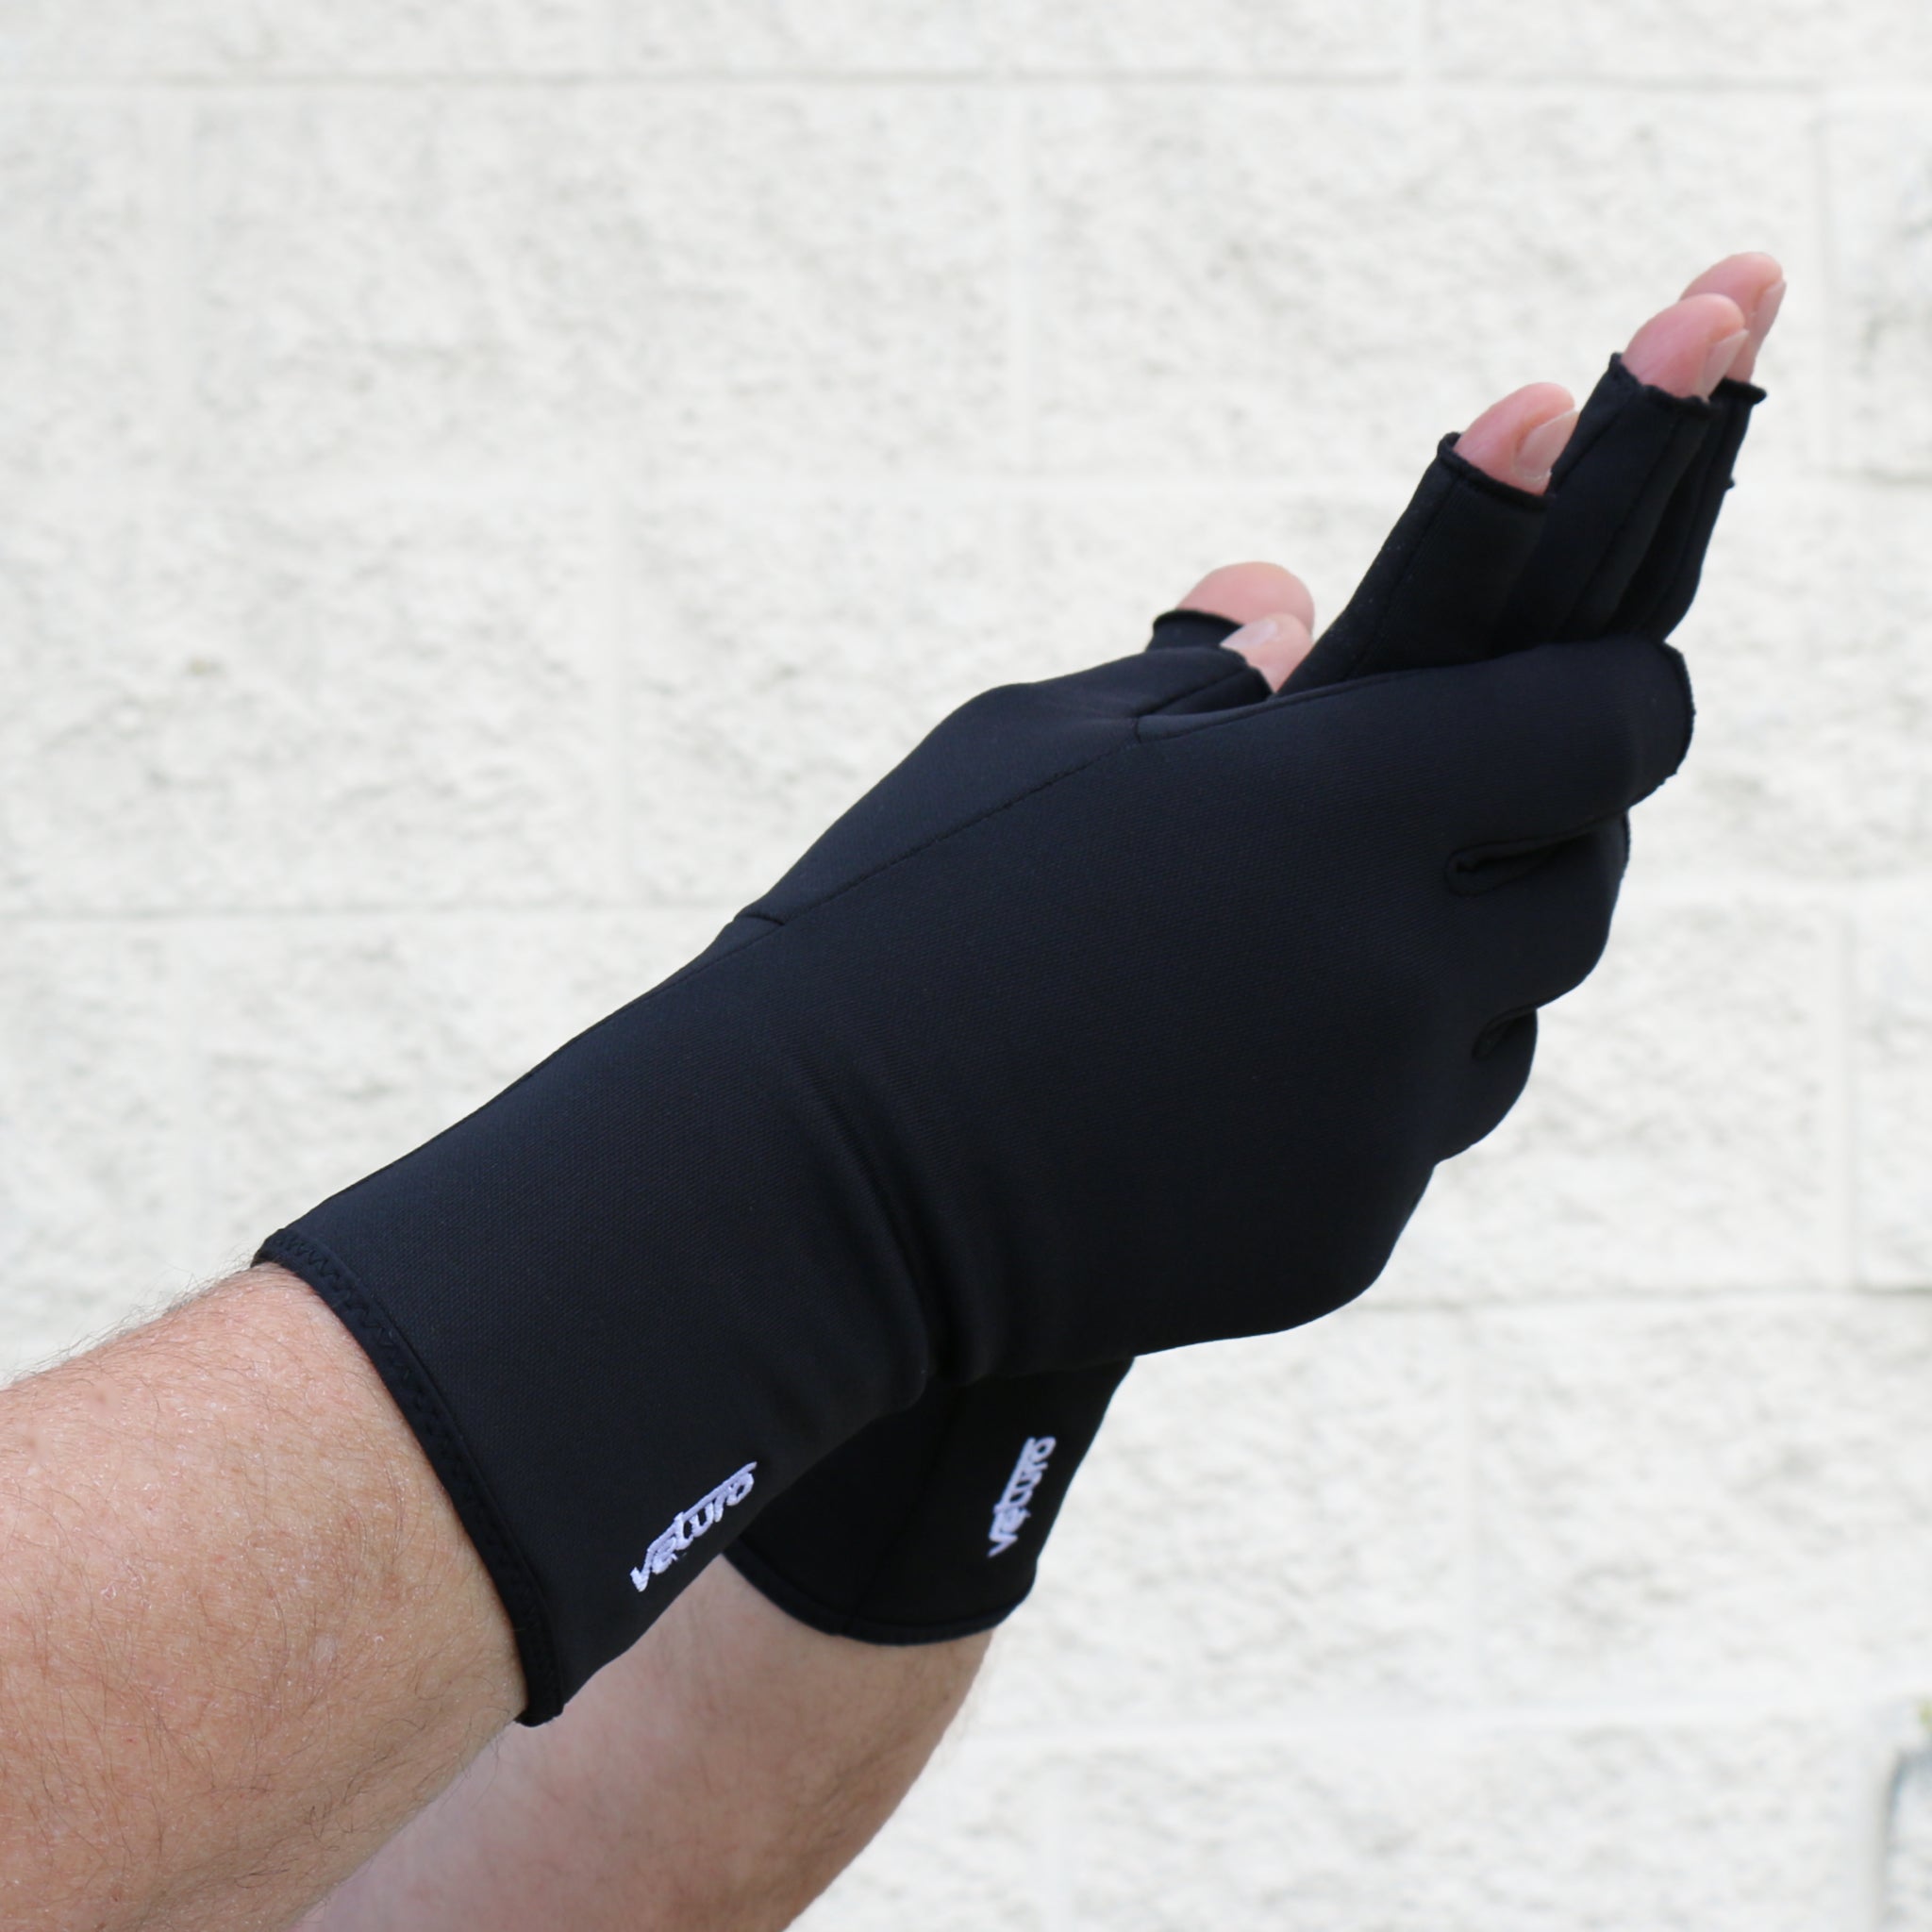 Infrared Fleece Gloves Next-to-Skin Fit Ultra Warmth Technology